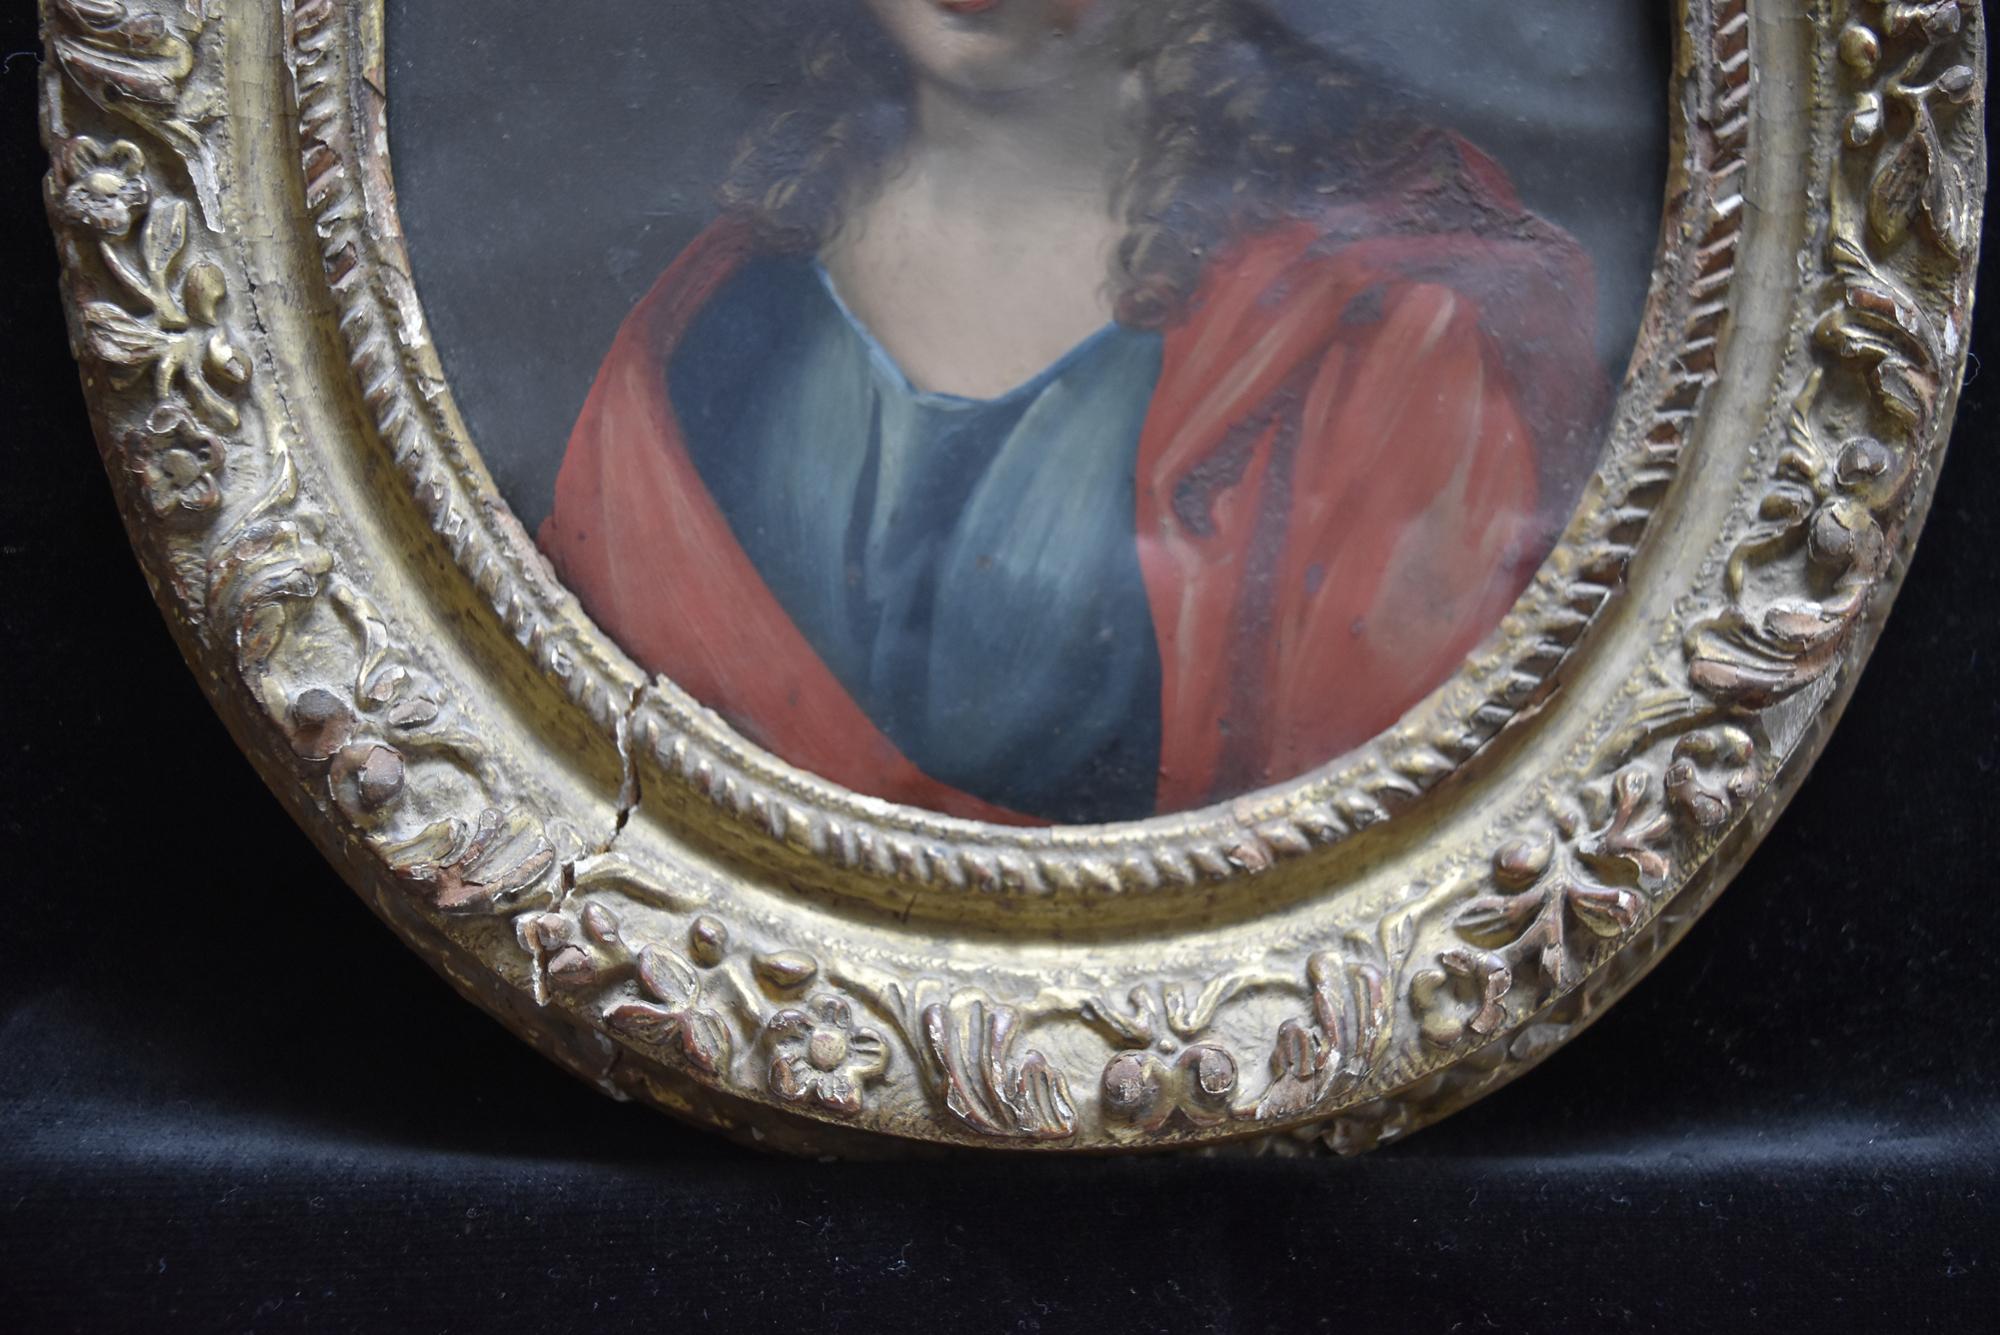 France 17th Century, Saint John the Evangelist, oil on copper - Black Figurative Painting by Unknown